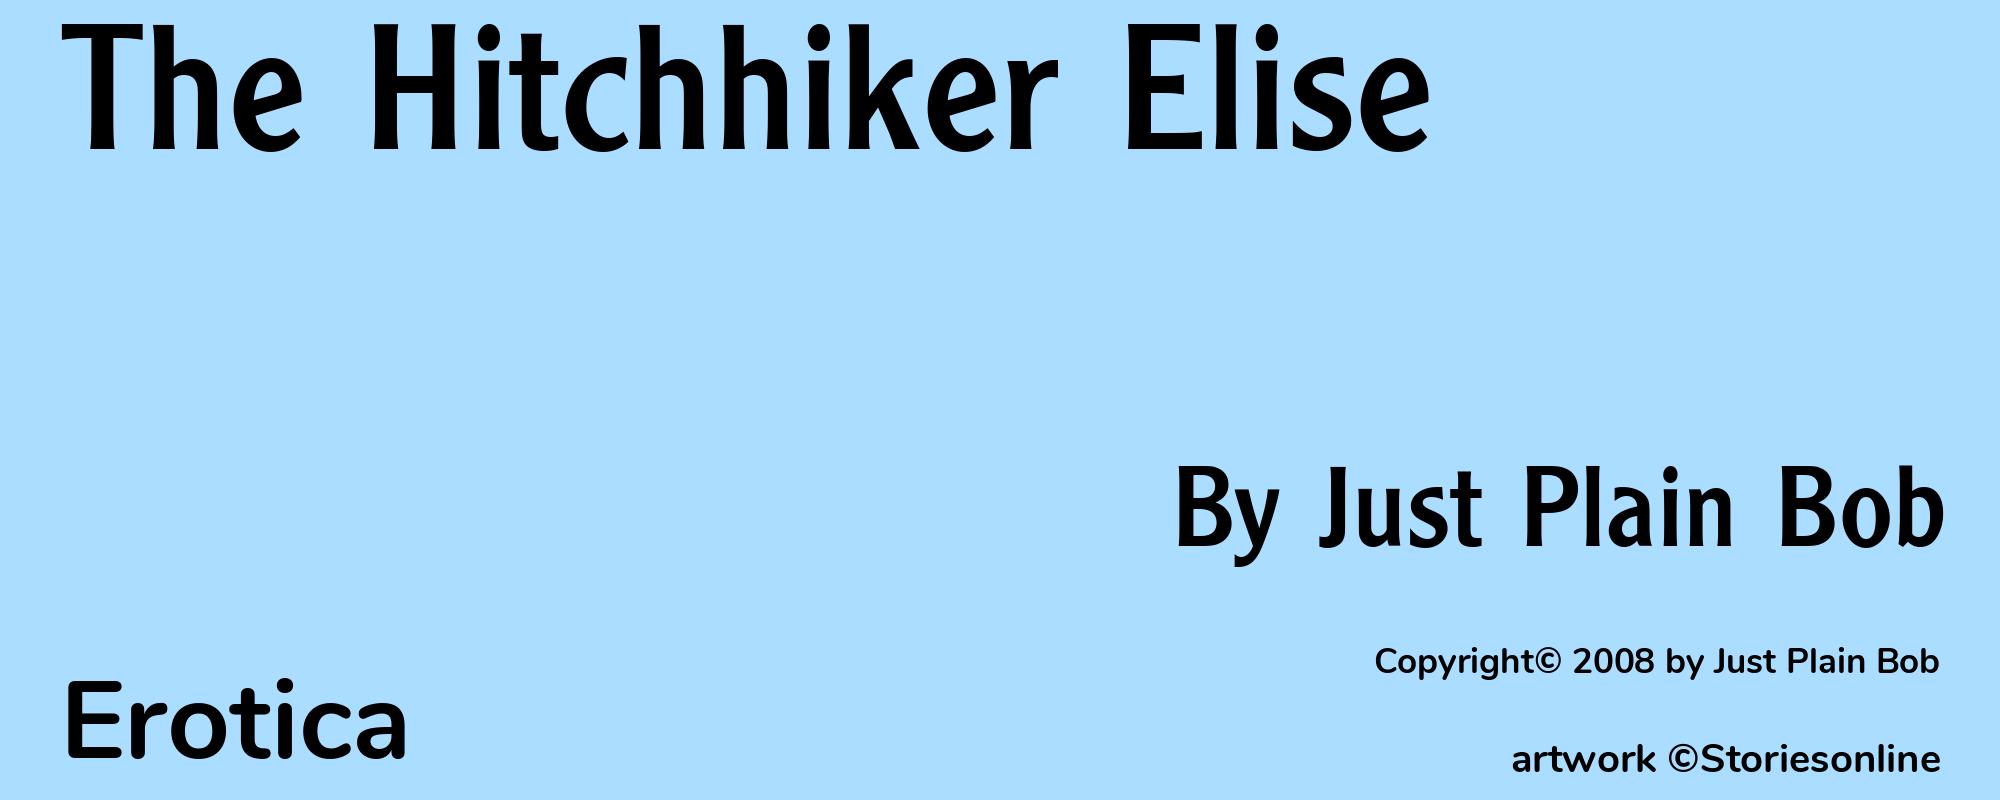 The Hitchhiker Elise - Cover